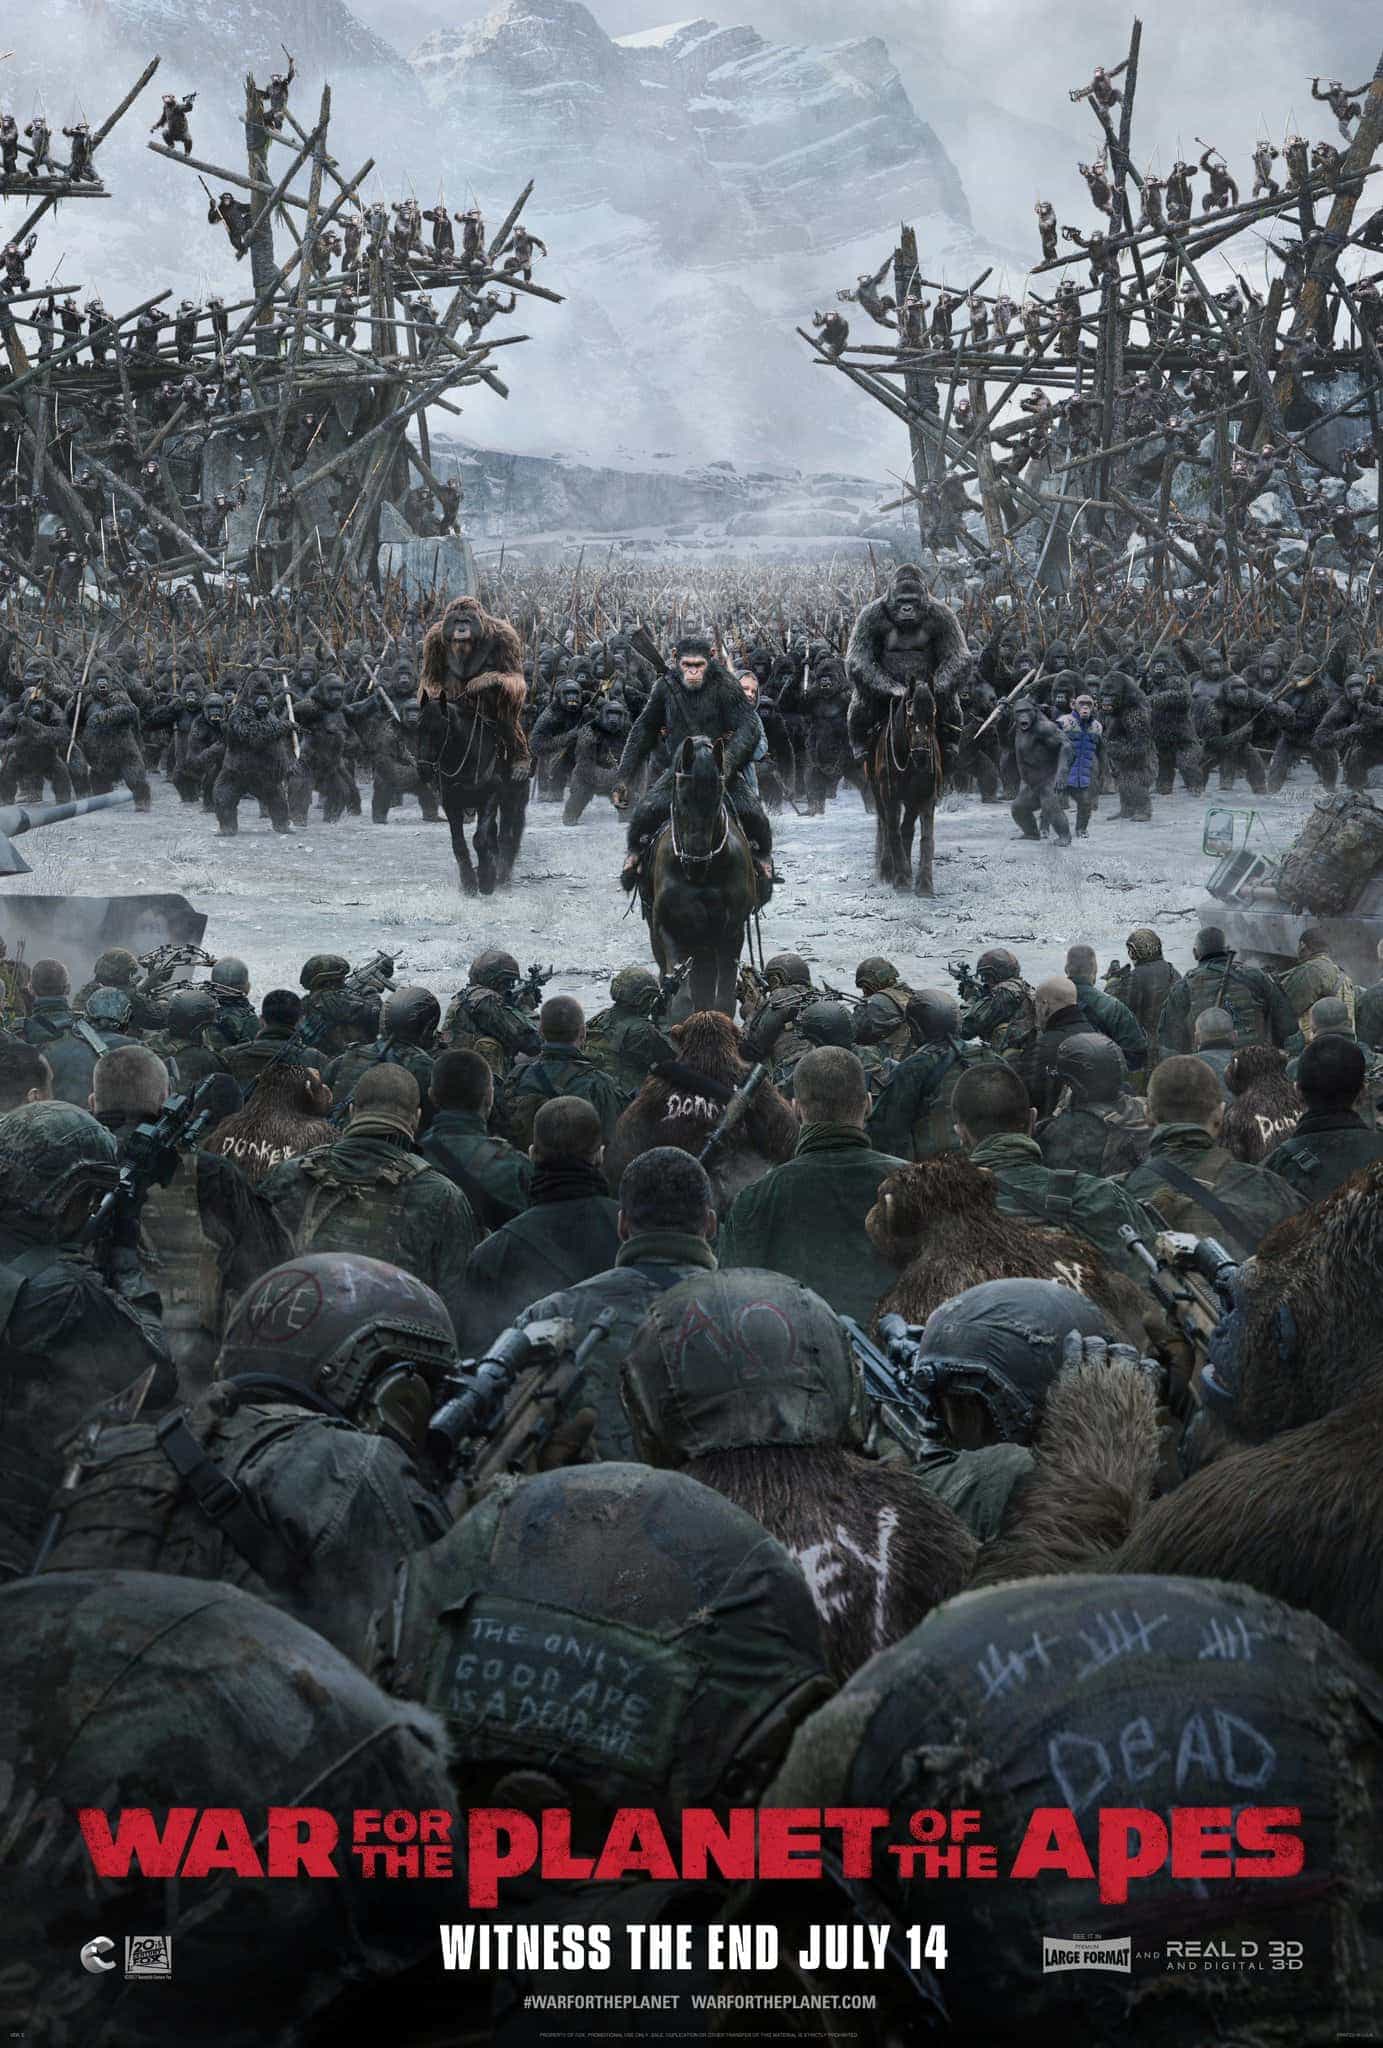 First trailer for War For The Planet of The Apes - its an all out war